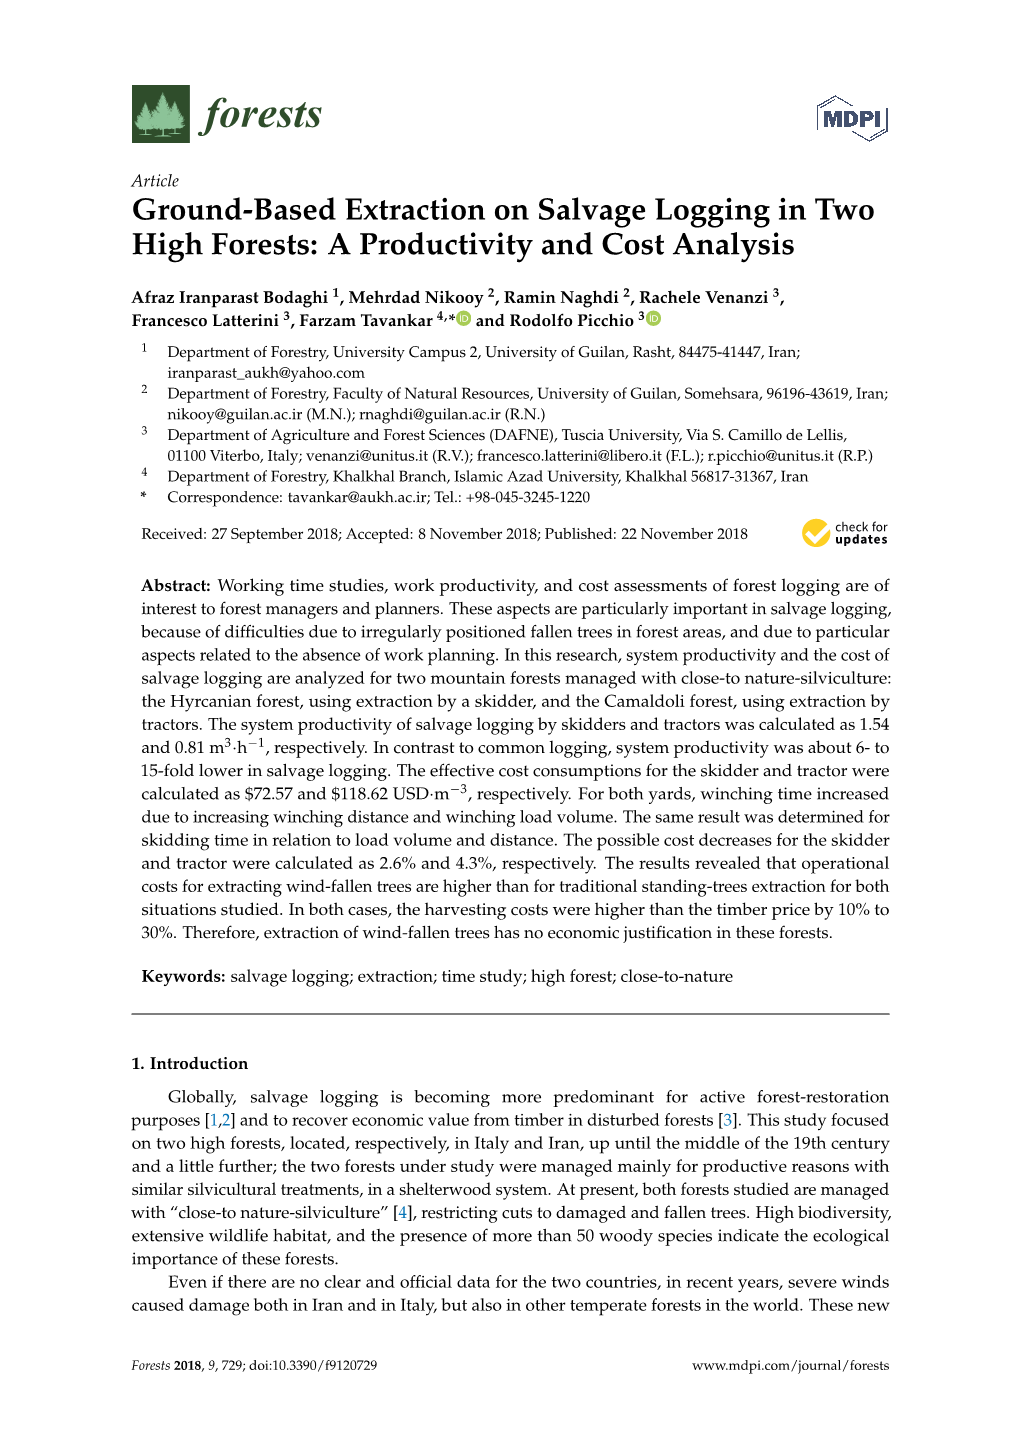 Ground-Based Extraction on Salvage Logging in Two High Forests: a Productivity and Cost Analysis